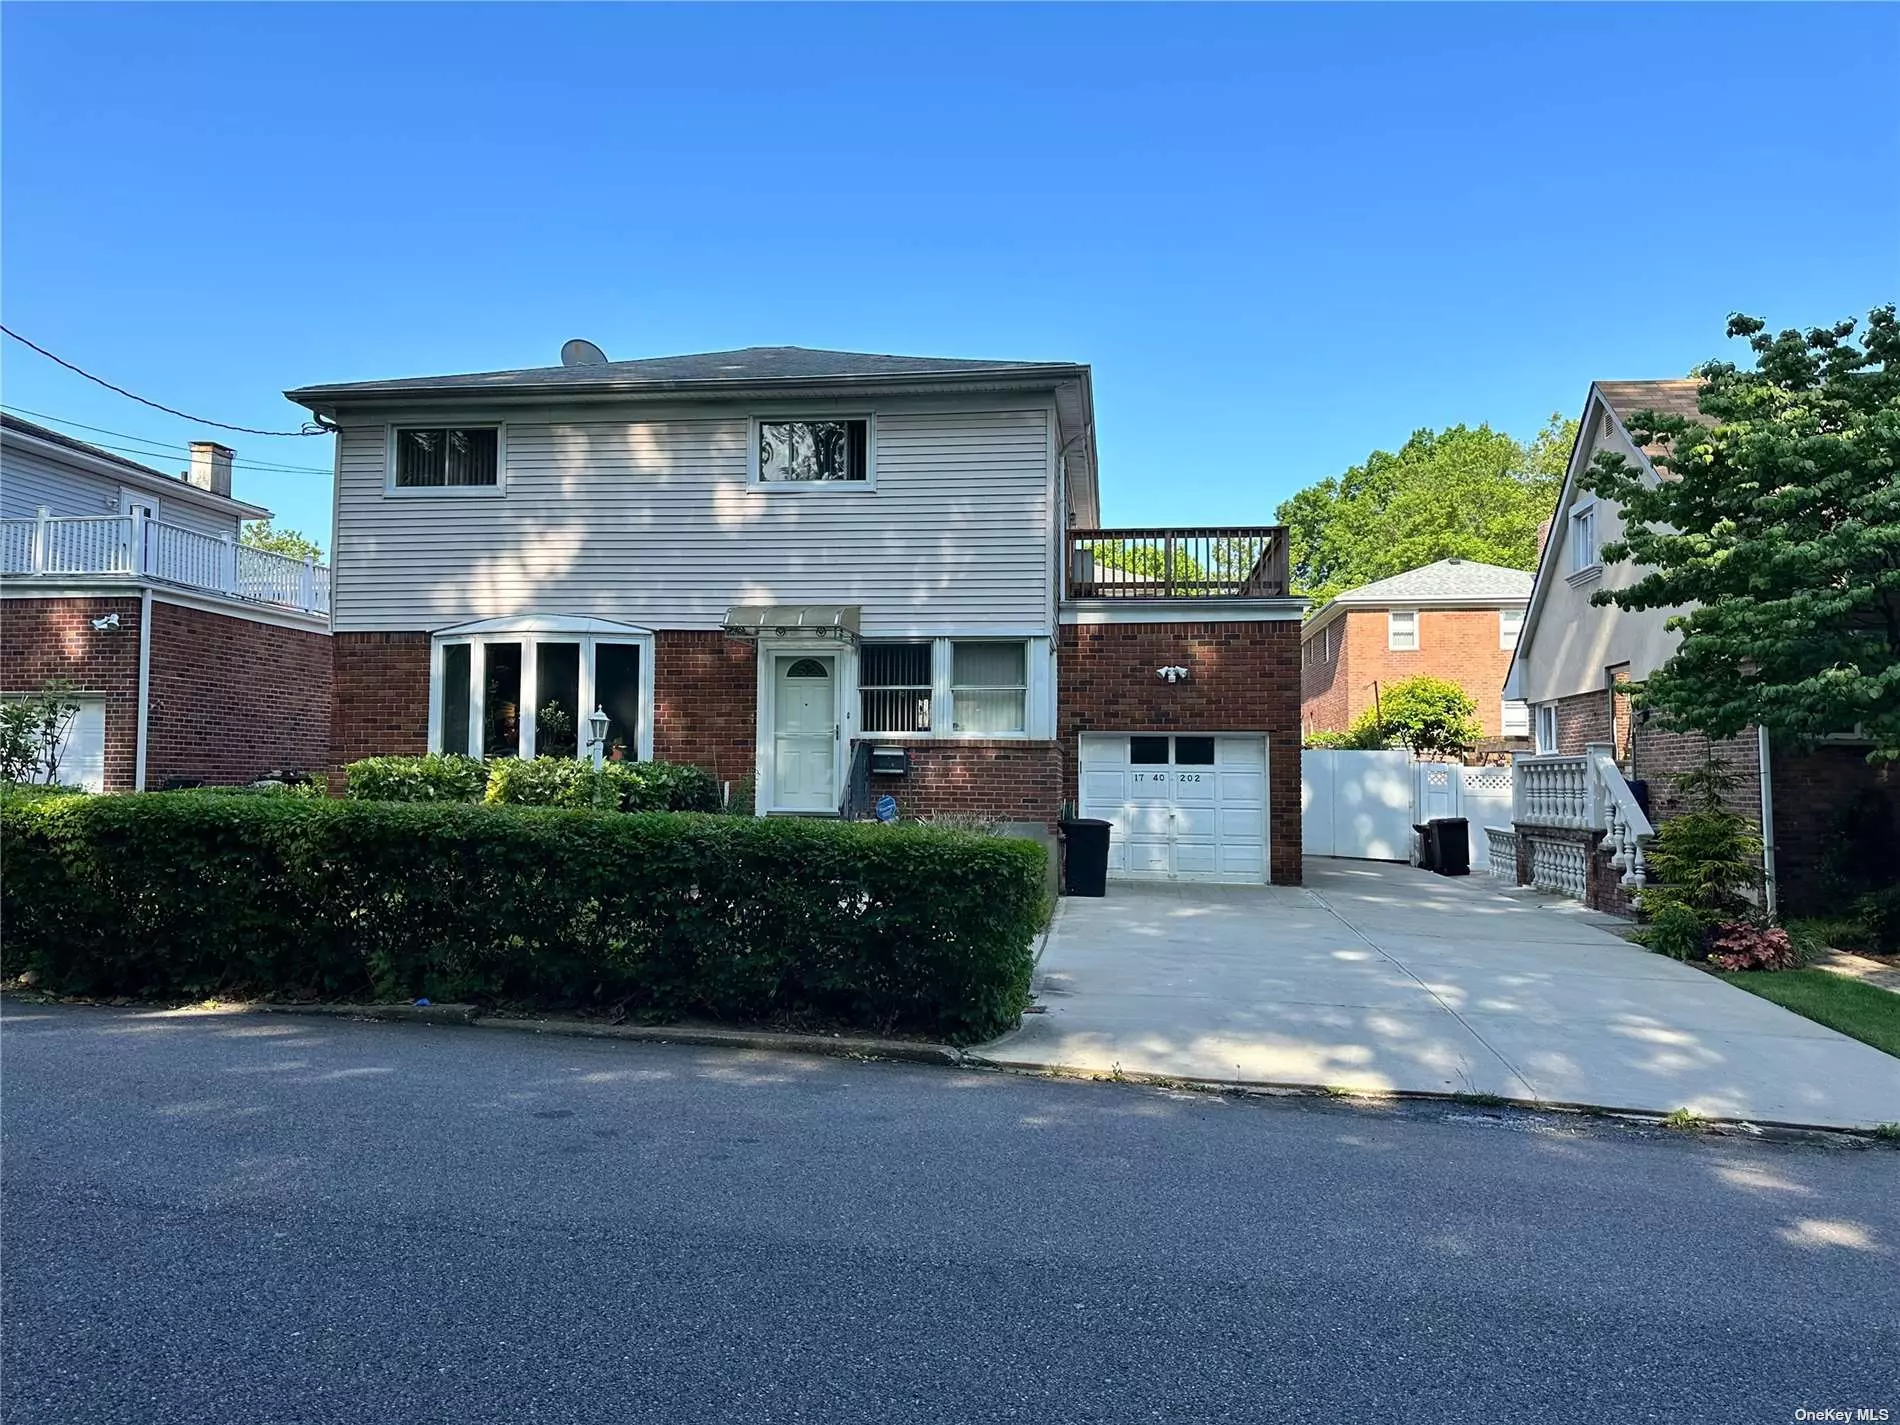 Beautiful one -family at a great location! Lot 54X61 Zone R3X. building 40X28 , Close to shopping, restaurants, highways. A couple blocks away from Willets Point Playground , Next to Clearview Park Golf Course . Few blocks away from Little Bay Park to the north and Ps 209 Clearview Gardens and buses Q16, QM20 Express Bus to Mid-Town Manhattan..,